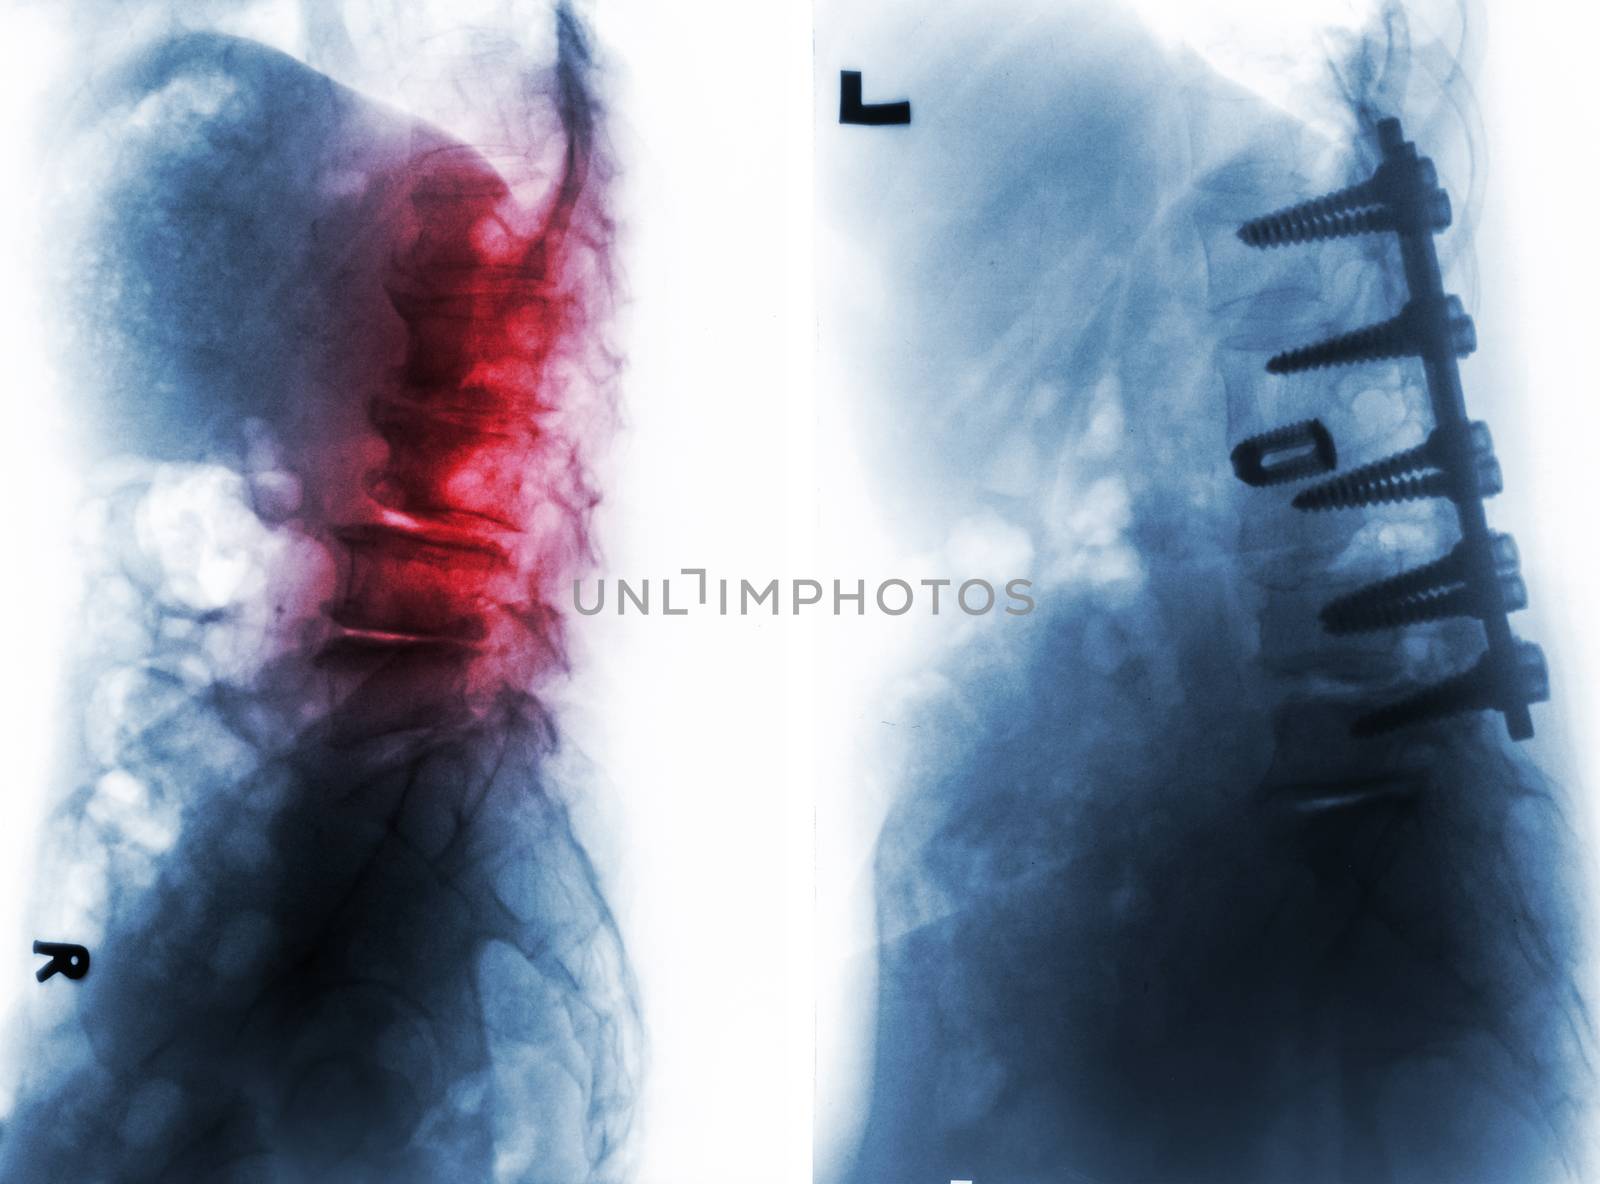 Spondylosis . Film x-ray of lumbar spine and comparison between before surgery ( left image ) and after surgery ( right image ) . Patient was operated and internal fixed . Lateral view .